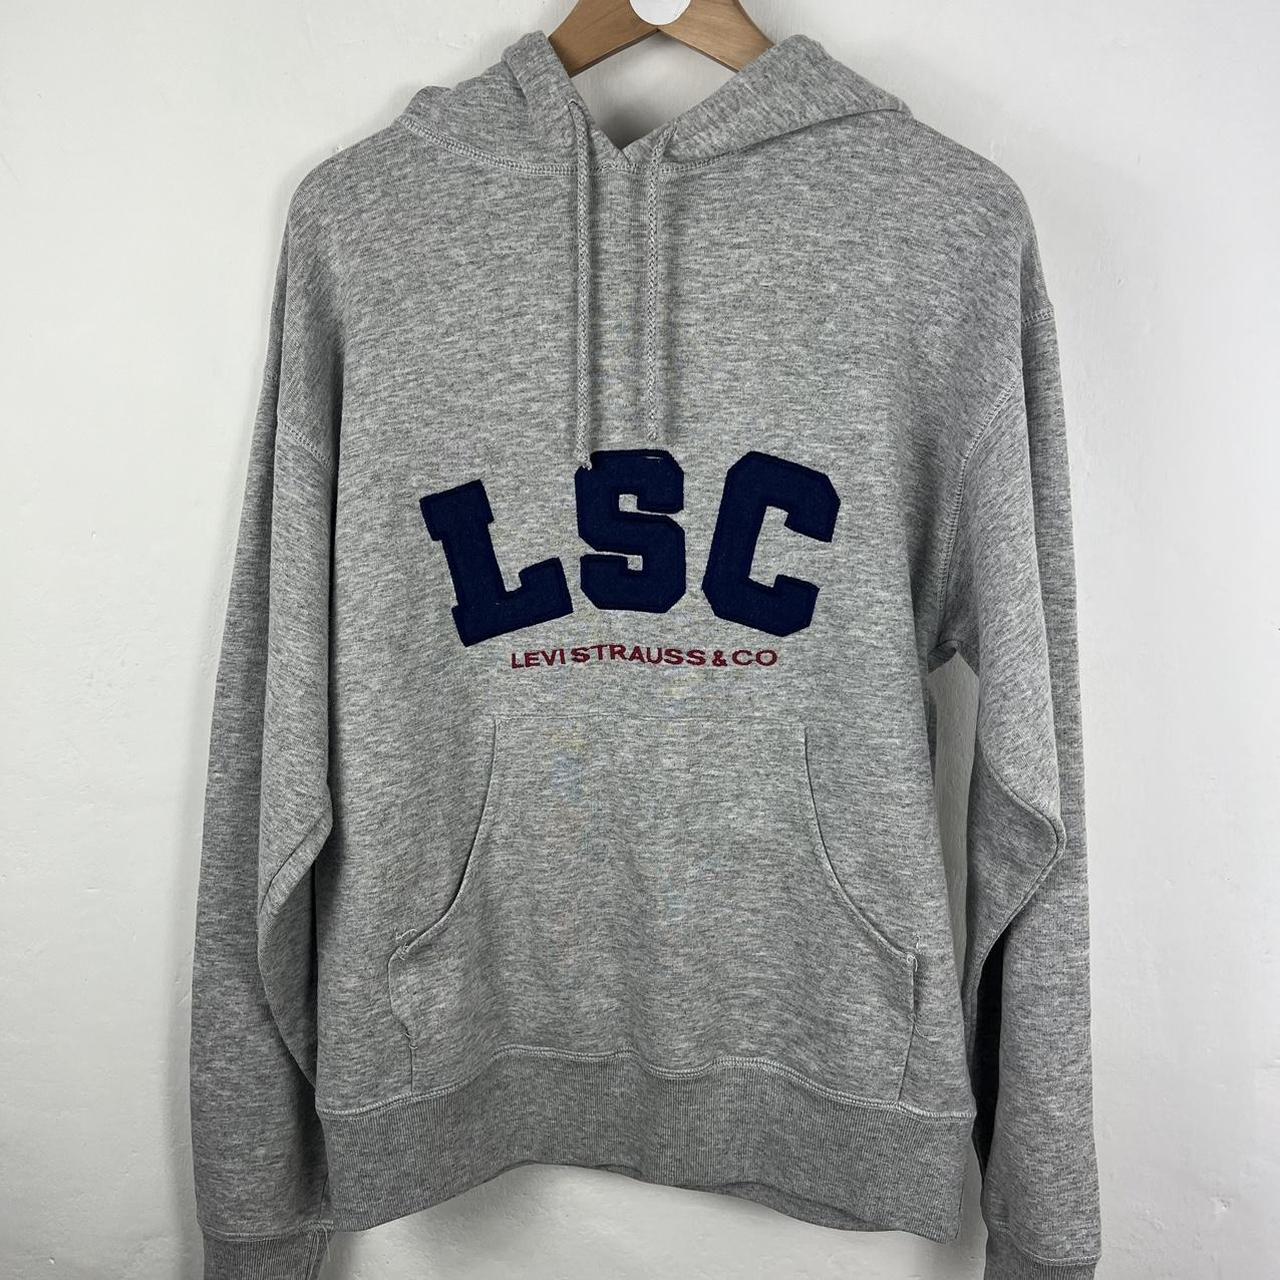 Levi’s hoodie small